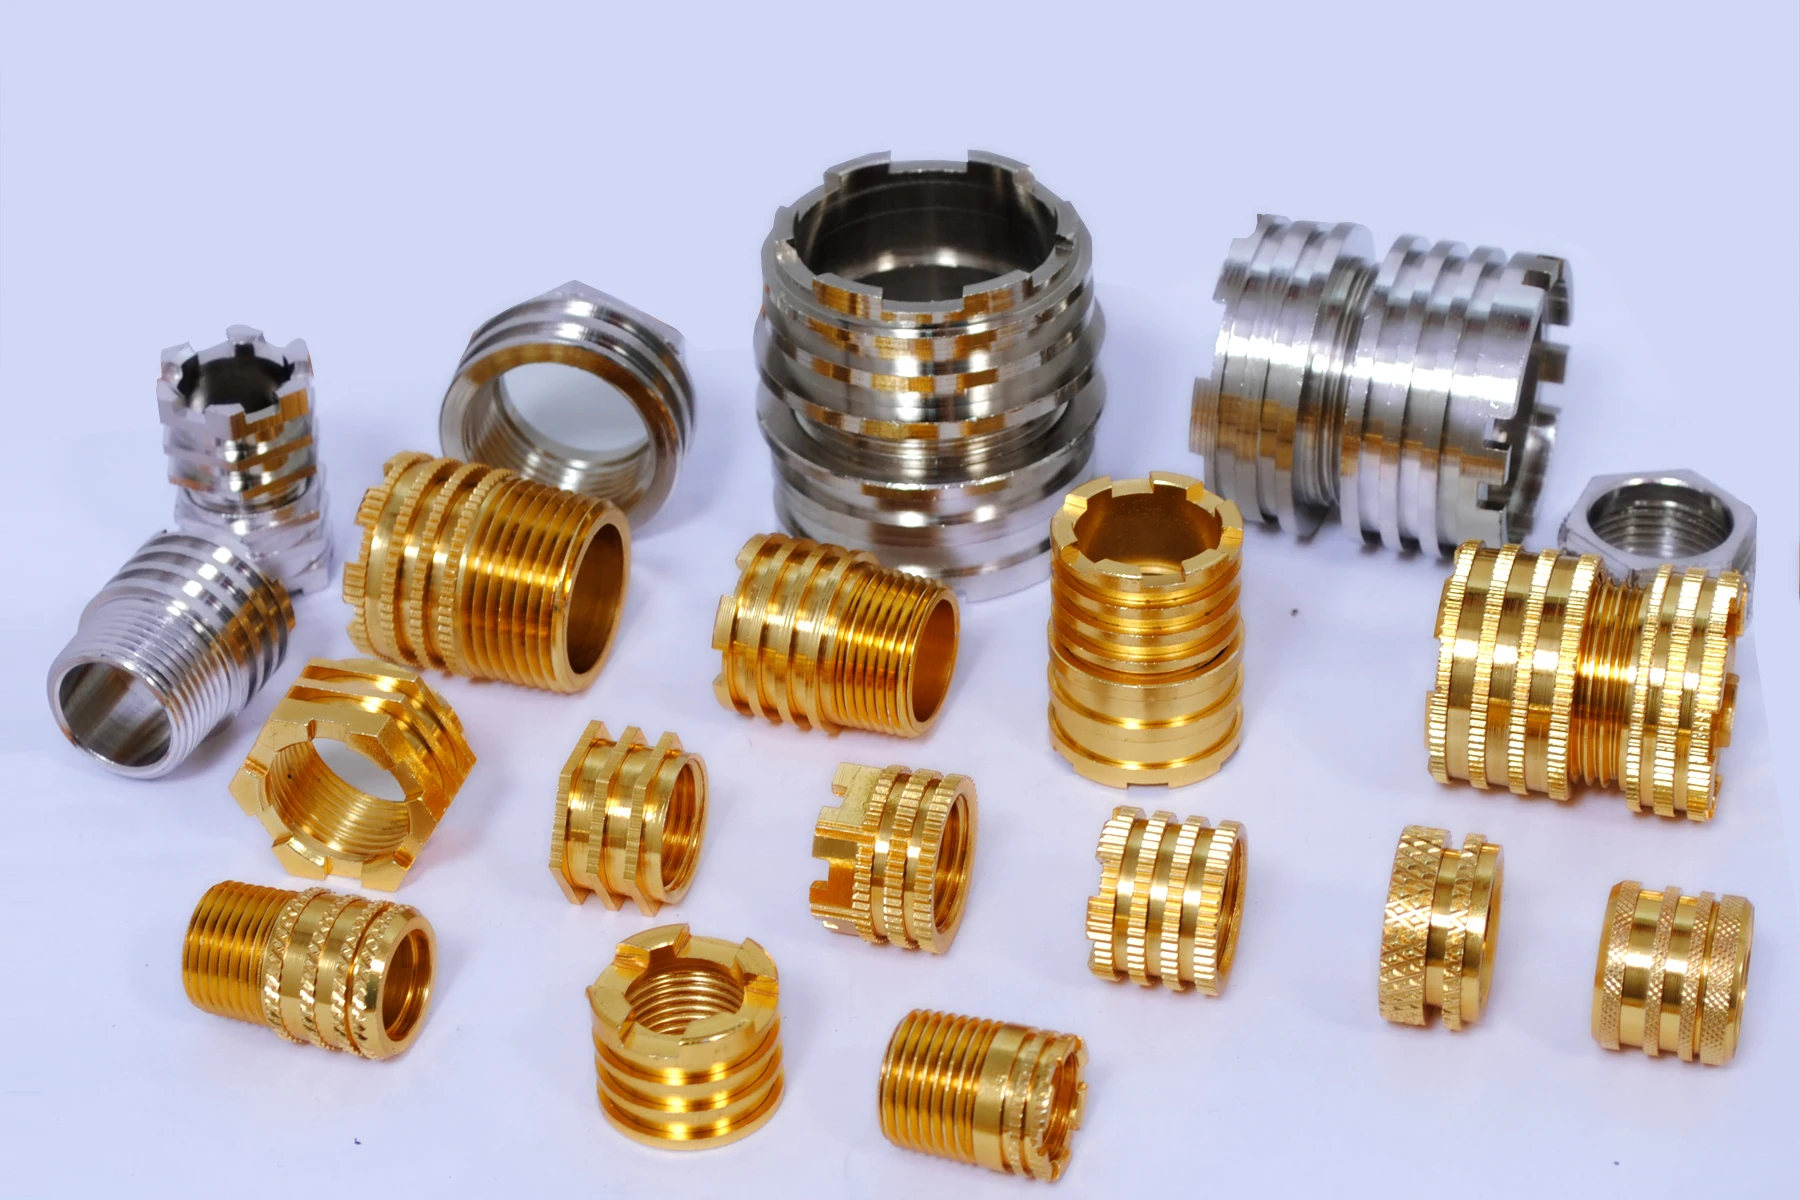 Solid Brass Injection Molding Knurled Thread Inserts Nuts M2 M2.5 M3 M4 M5 M6 M8 